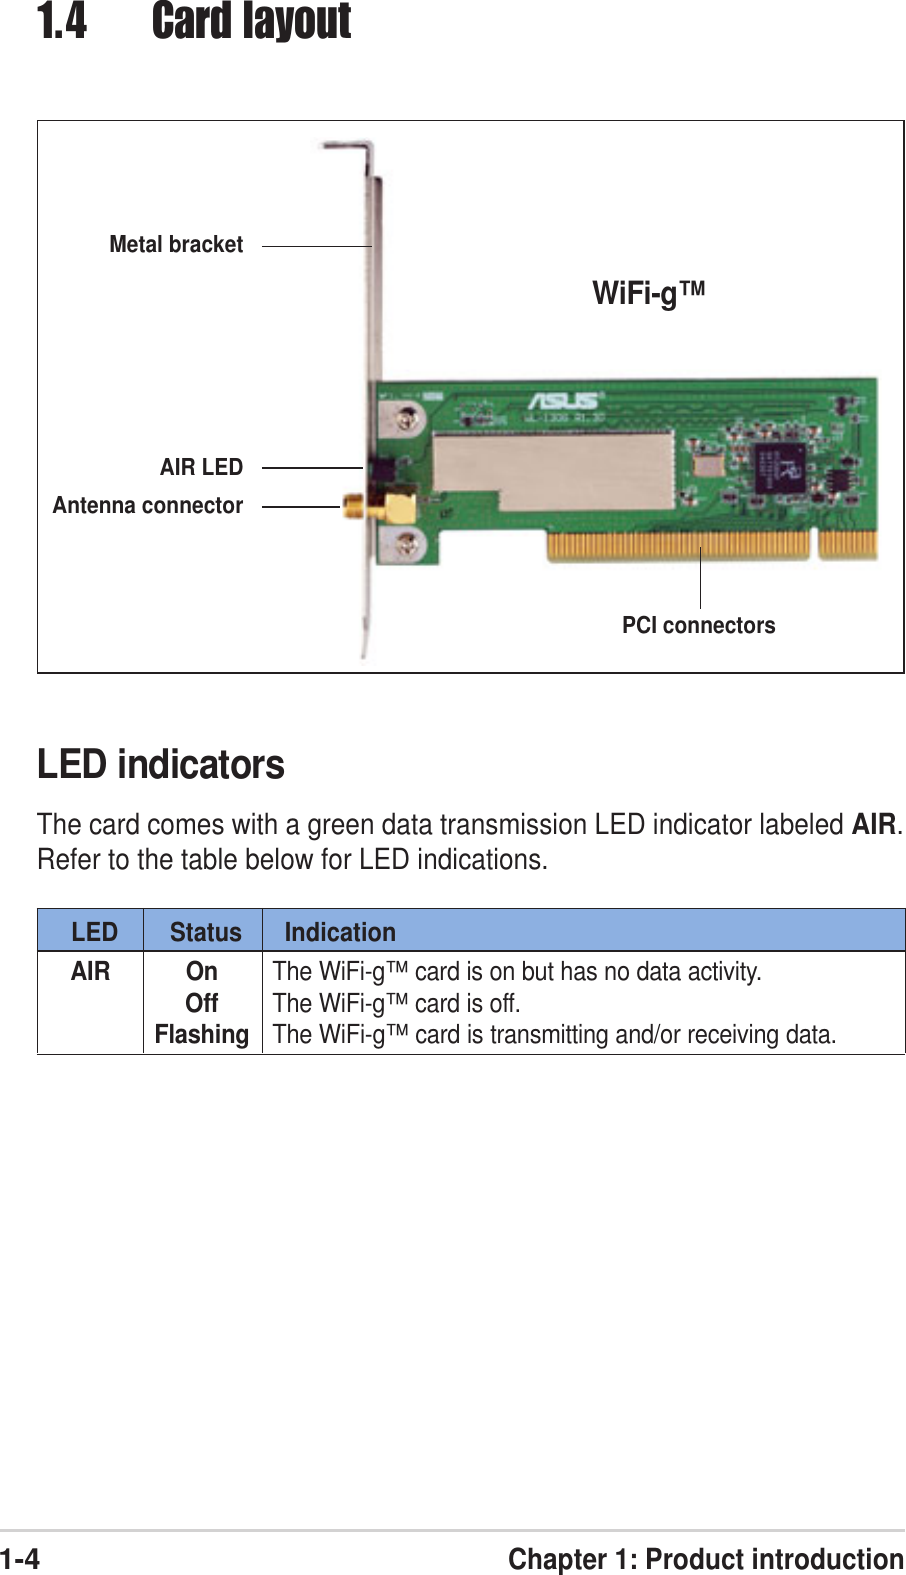 1-4Chapter 1: Product introductionLED indicatorsThe card comes with a green data transmission LED indicator labeled AIR.Refer to the table below for LED indications.LED Status IndicationAIR On The WiFi-g™ card is on but has no data activity.Off The WiFi-g™ card is off.Flashing The WiFi-g™ card is transmitting and/or receiving data.Metal bracketAIR LEDAntenna connectorPCI connectors1.4 Card layoutWiFi-g™